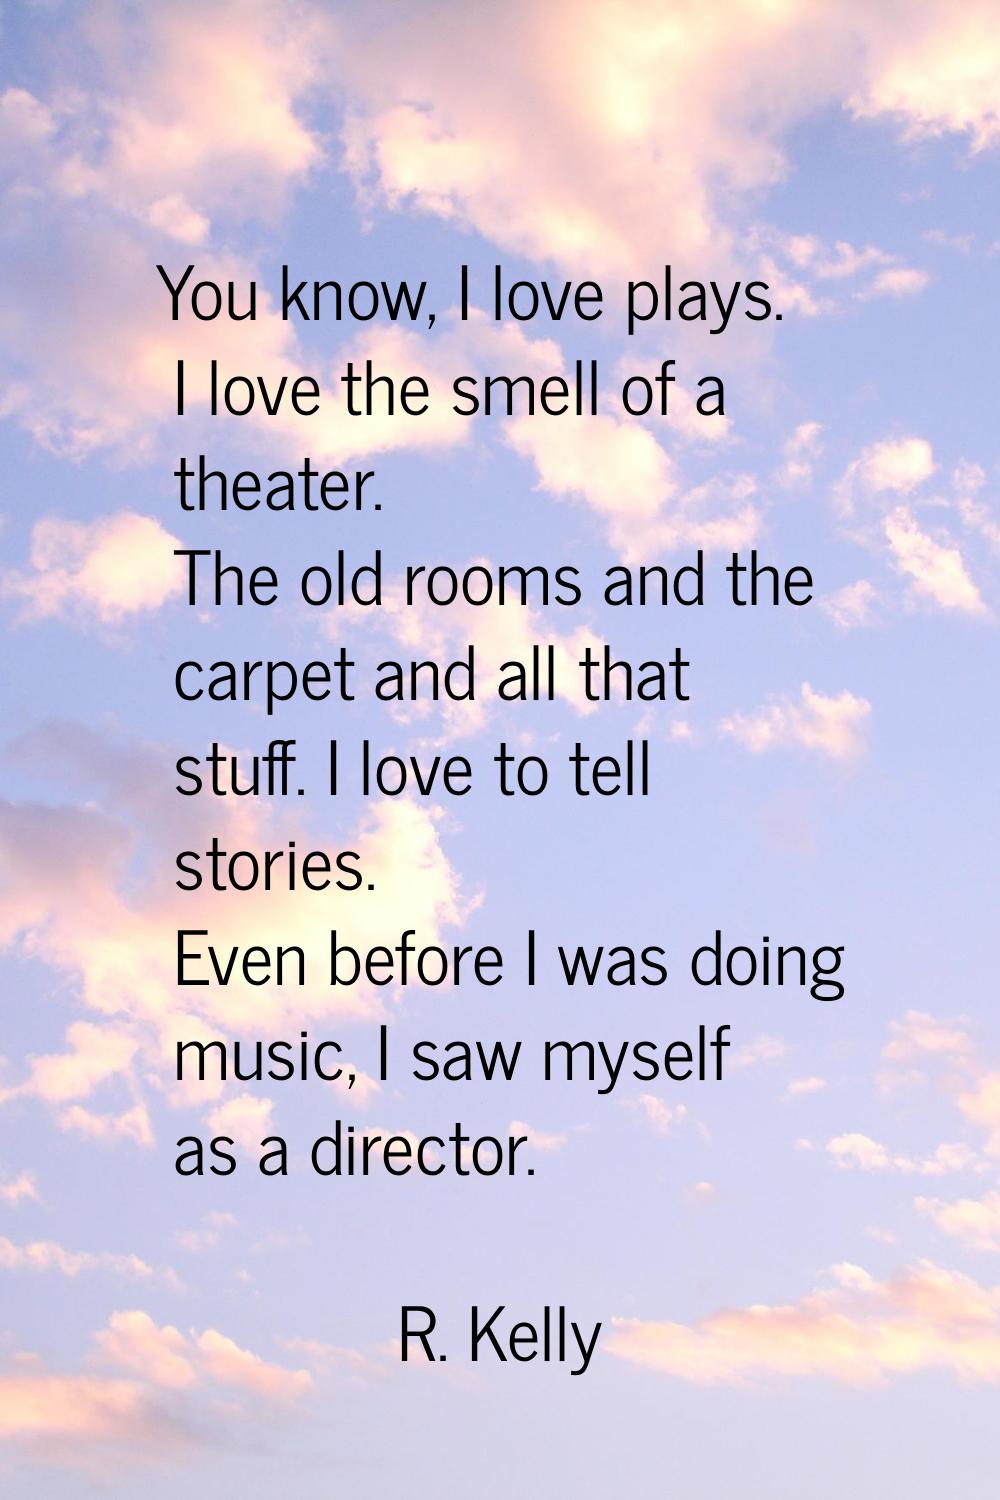 You know, I love plays. I love the smell of a theater. The old rooms and the carpet and all that st